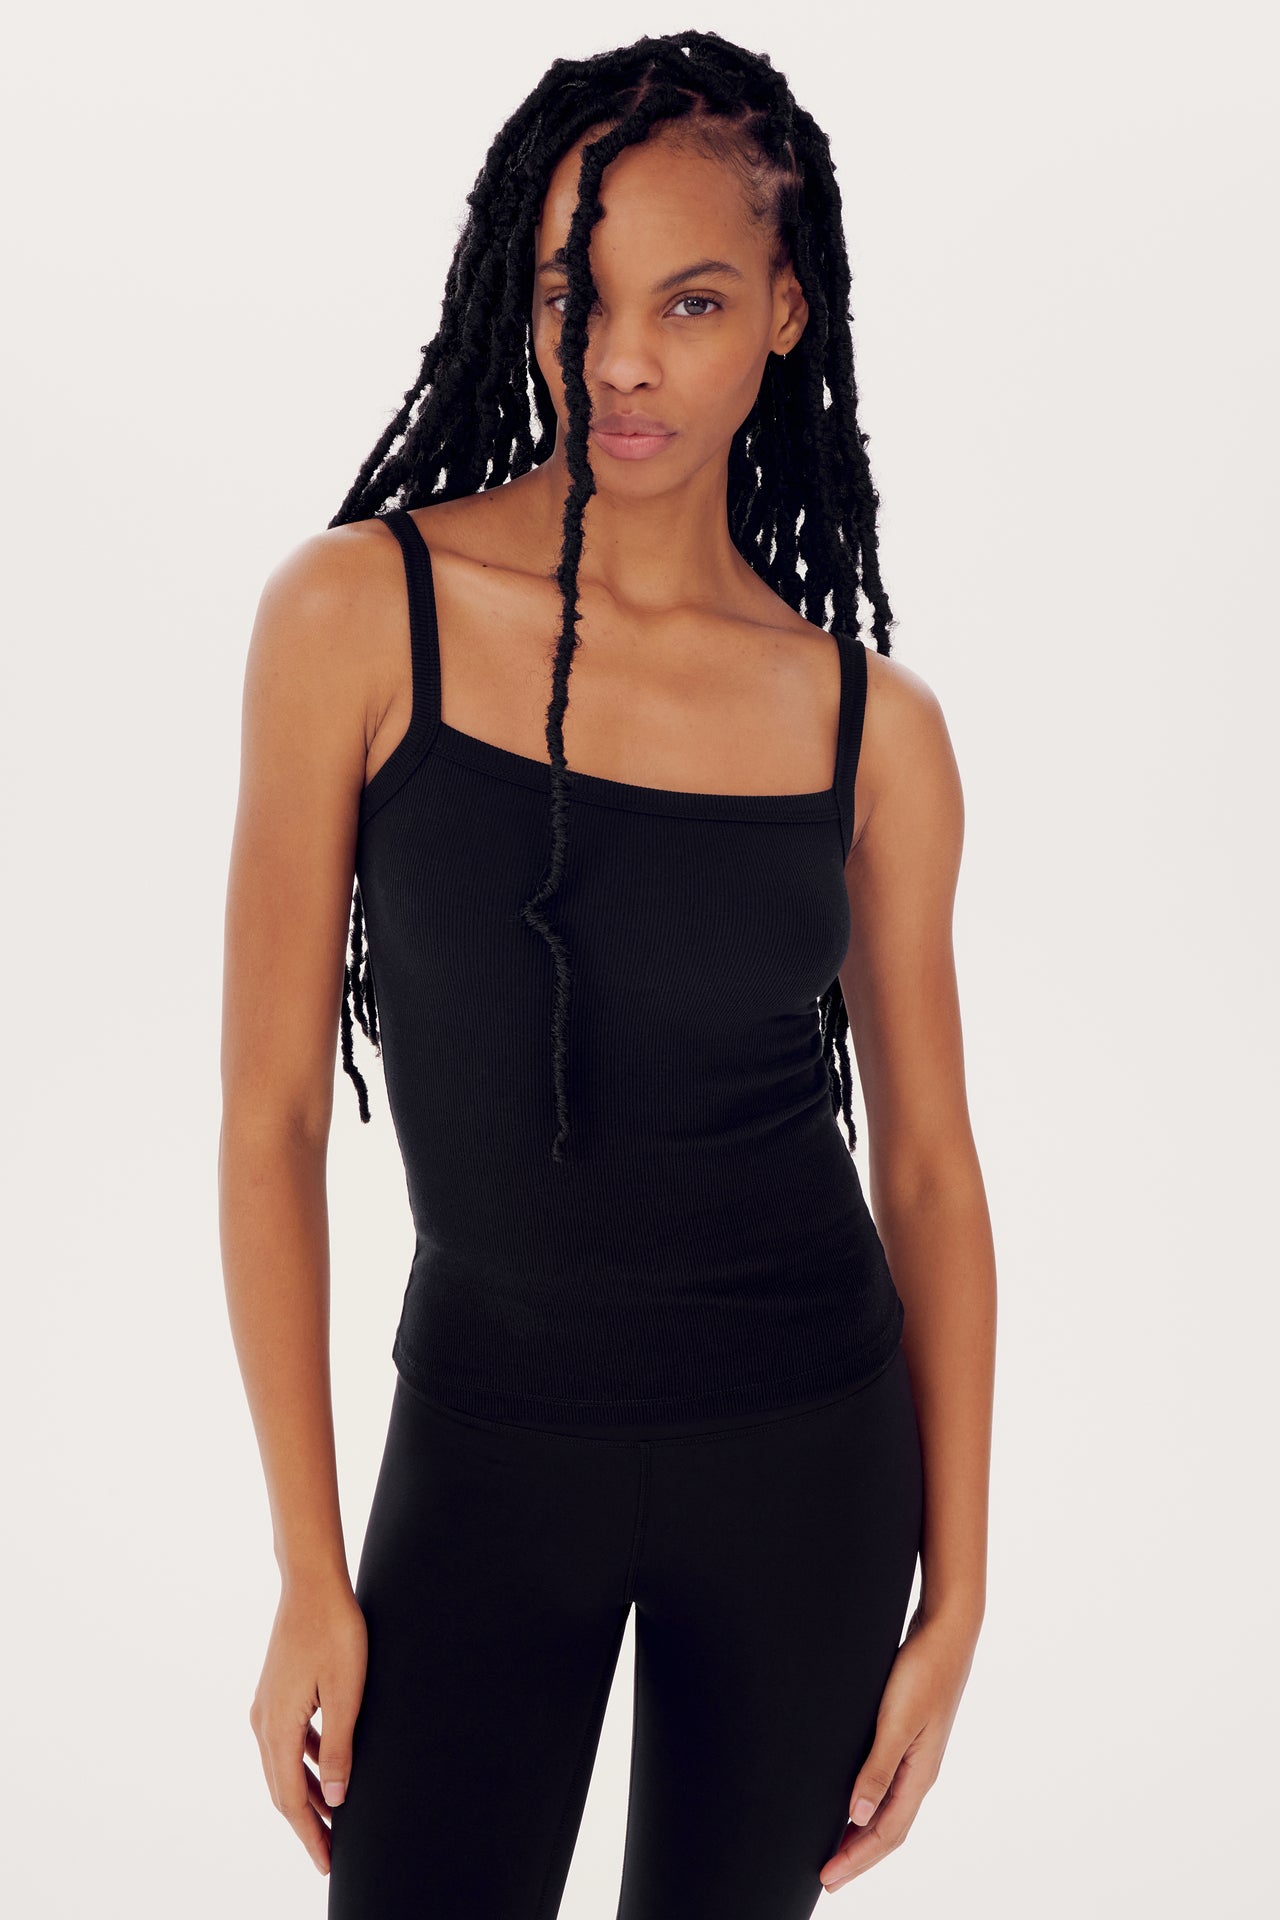 A woman in a black Romy Rib Tank by SPLITS59 and leggings, standing against a white background, looking at the camera with a neutral expression. She has long, black braided hair.